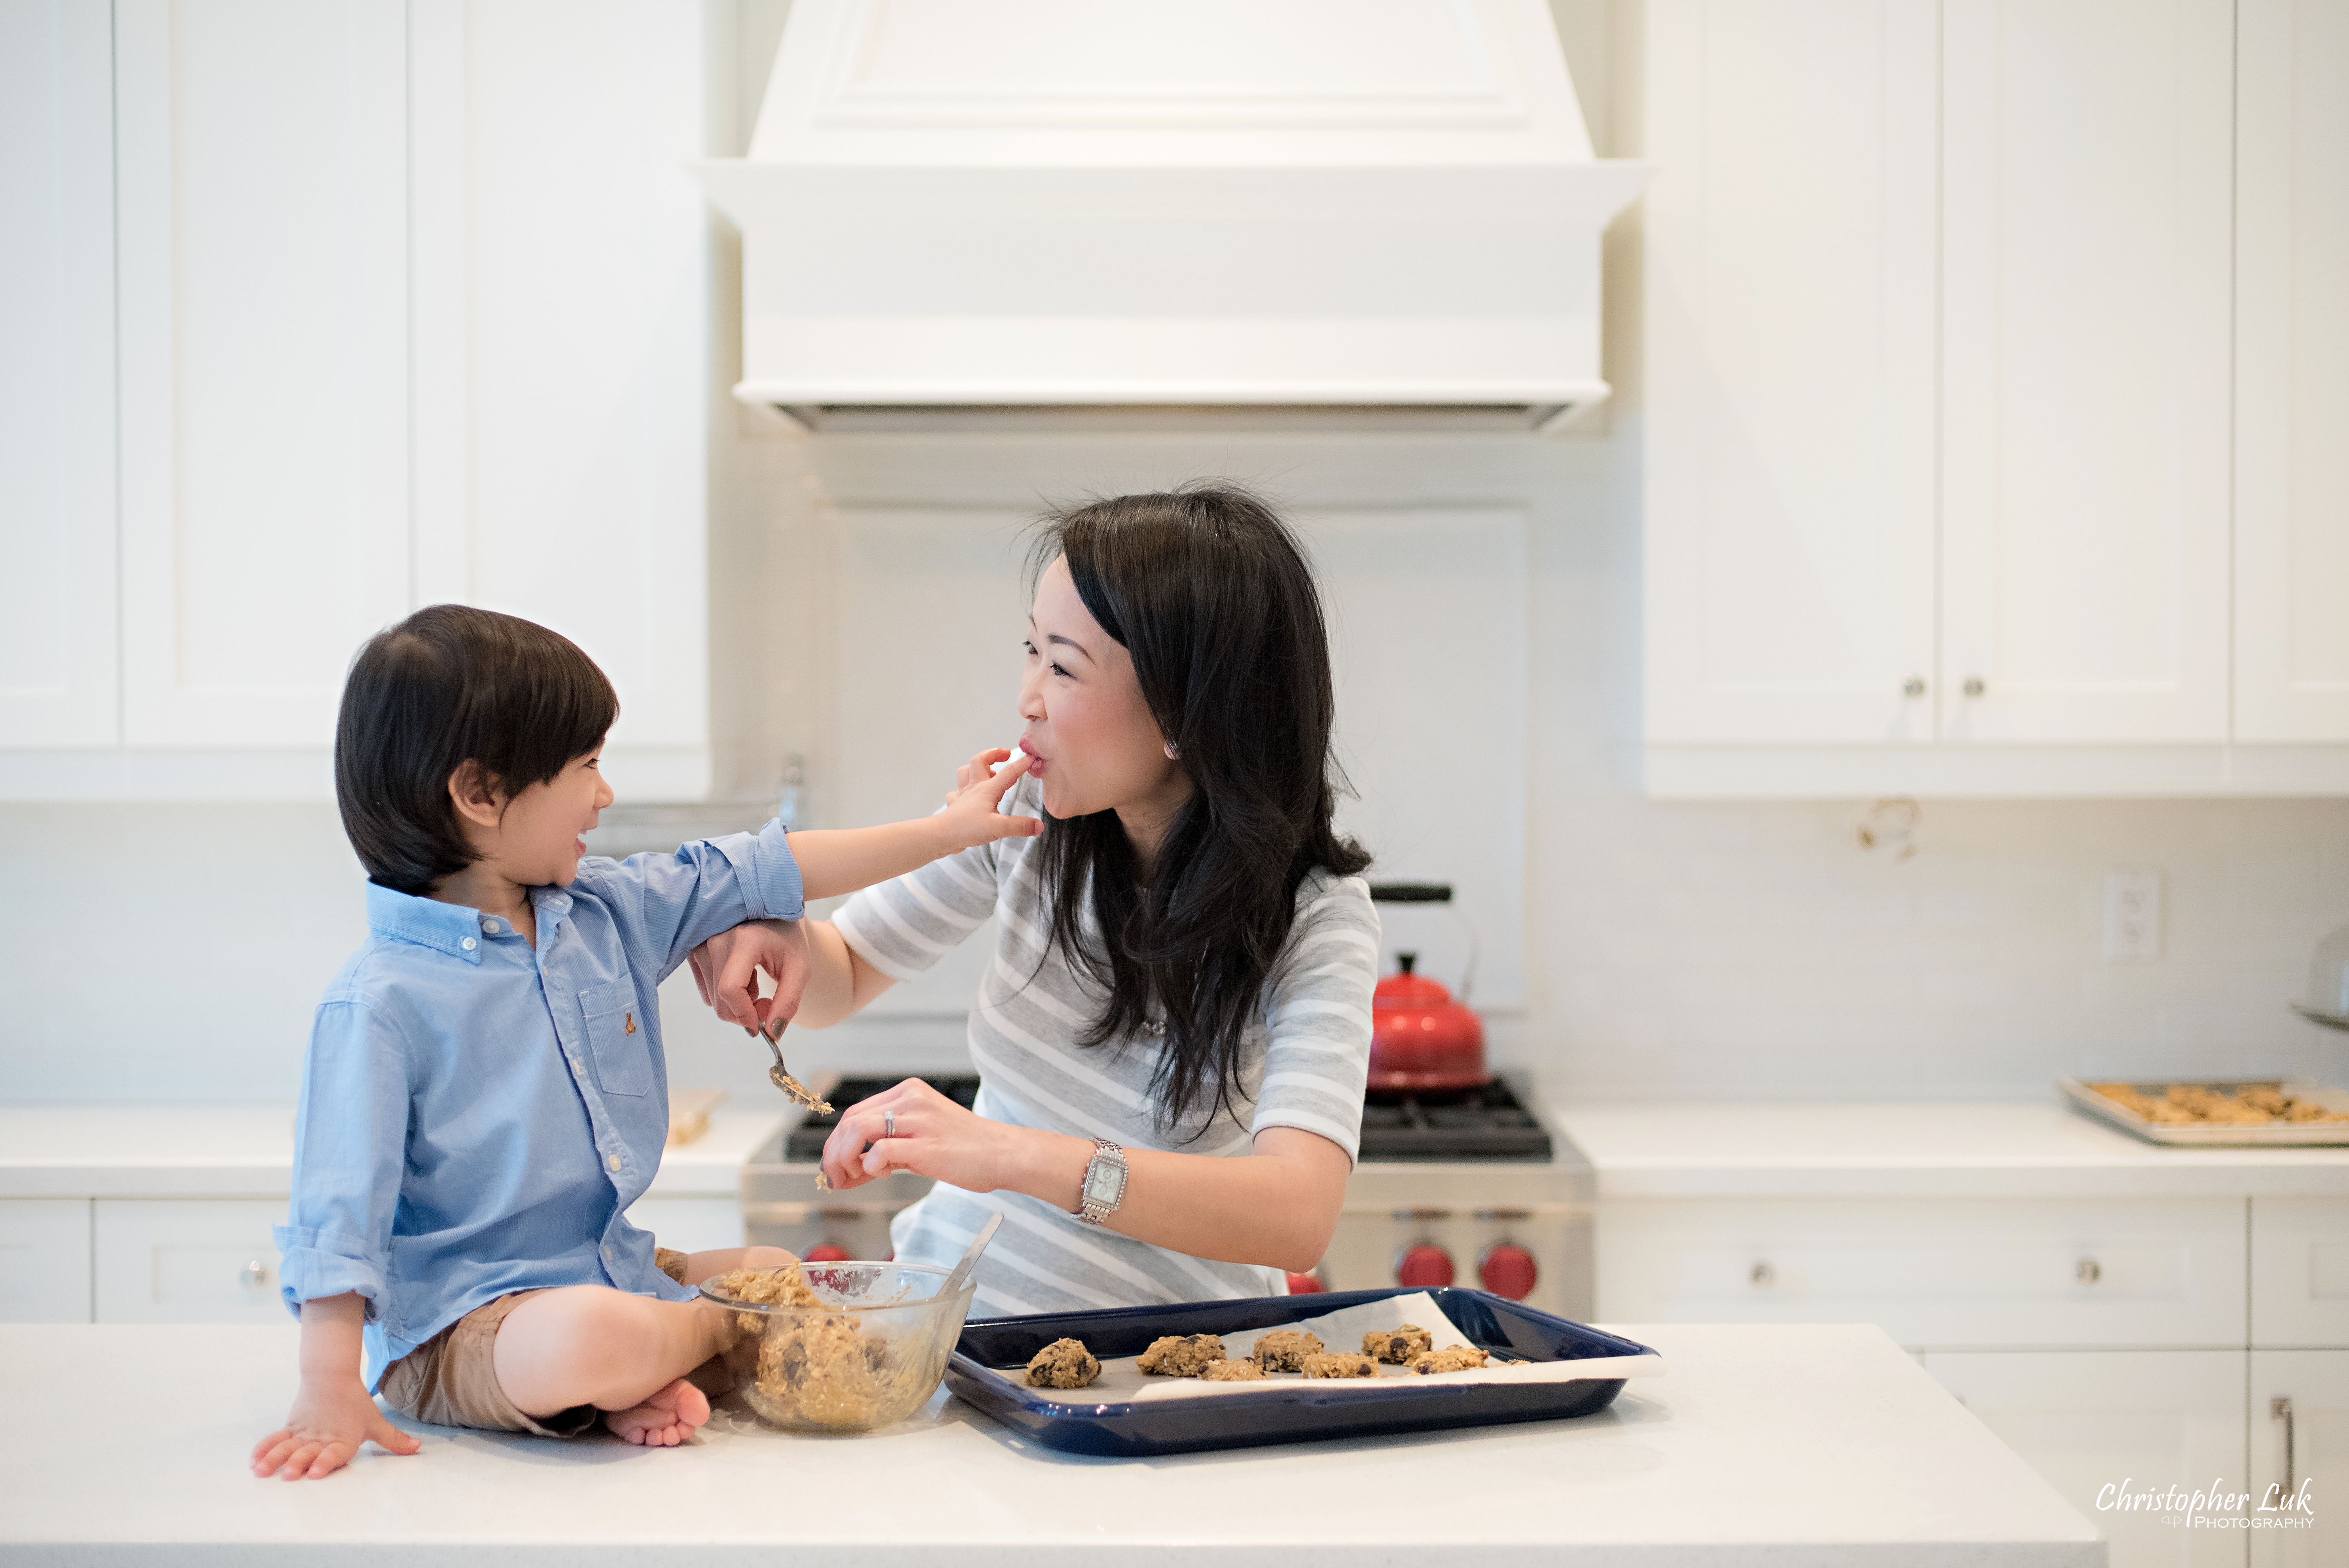 Christopher Luk 2015 - Toronto Family Toddler Winter Spring Indoor Home Session - Mom Toddler Son Boy Blue Grey White Striped Shirt Fashion Children Lifestyle Kitchen Centre Island Fun Candid Photojournalistic Finger Licking Cute